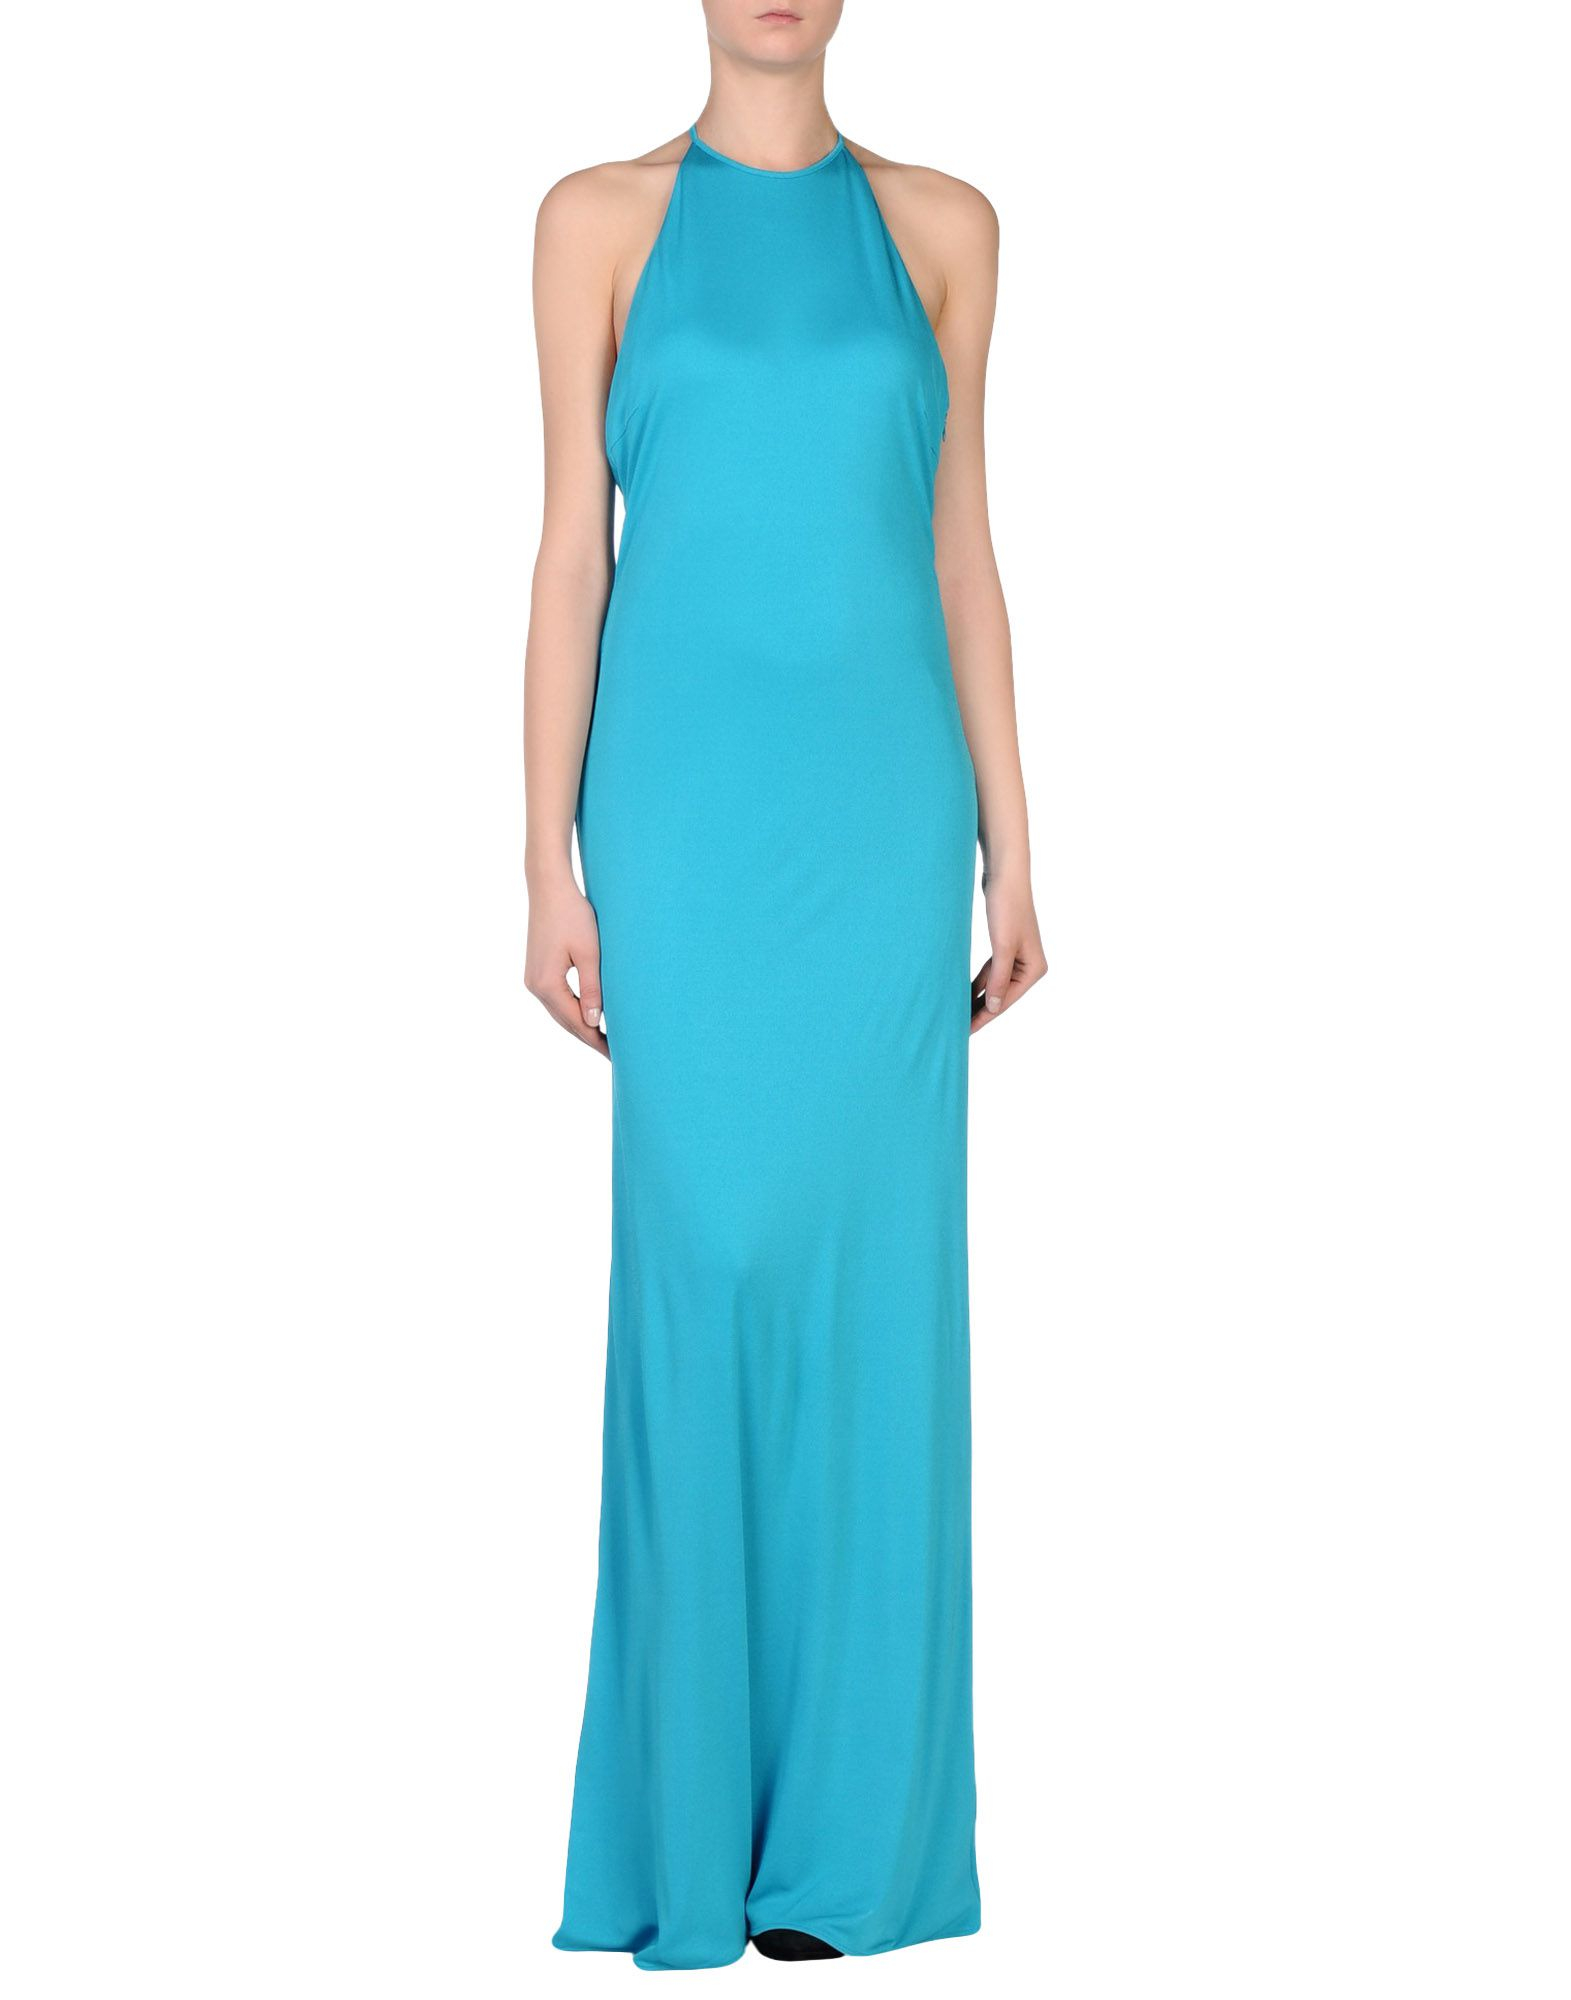 Emilio pucci Long Dress in Blue (Turquoise) | Lyst